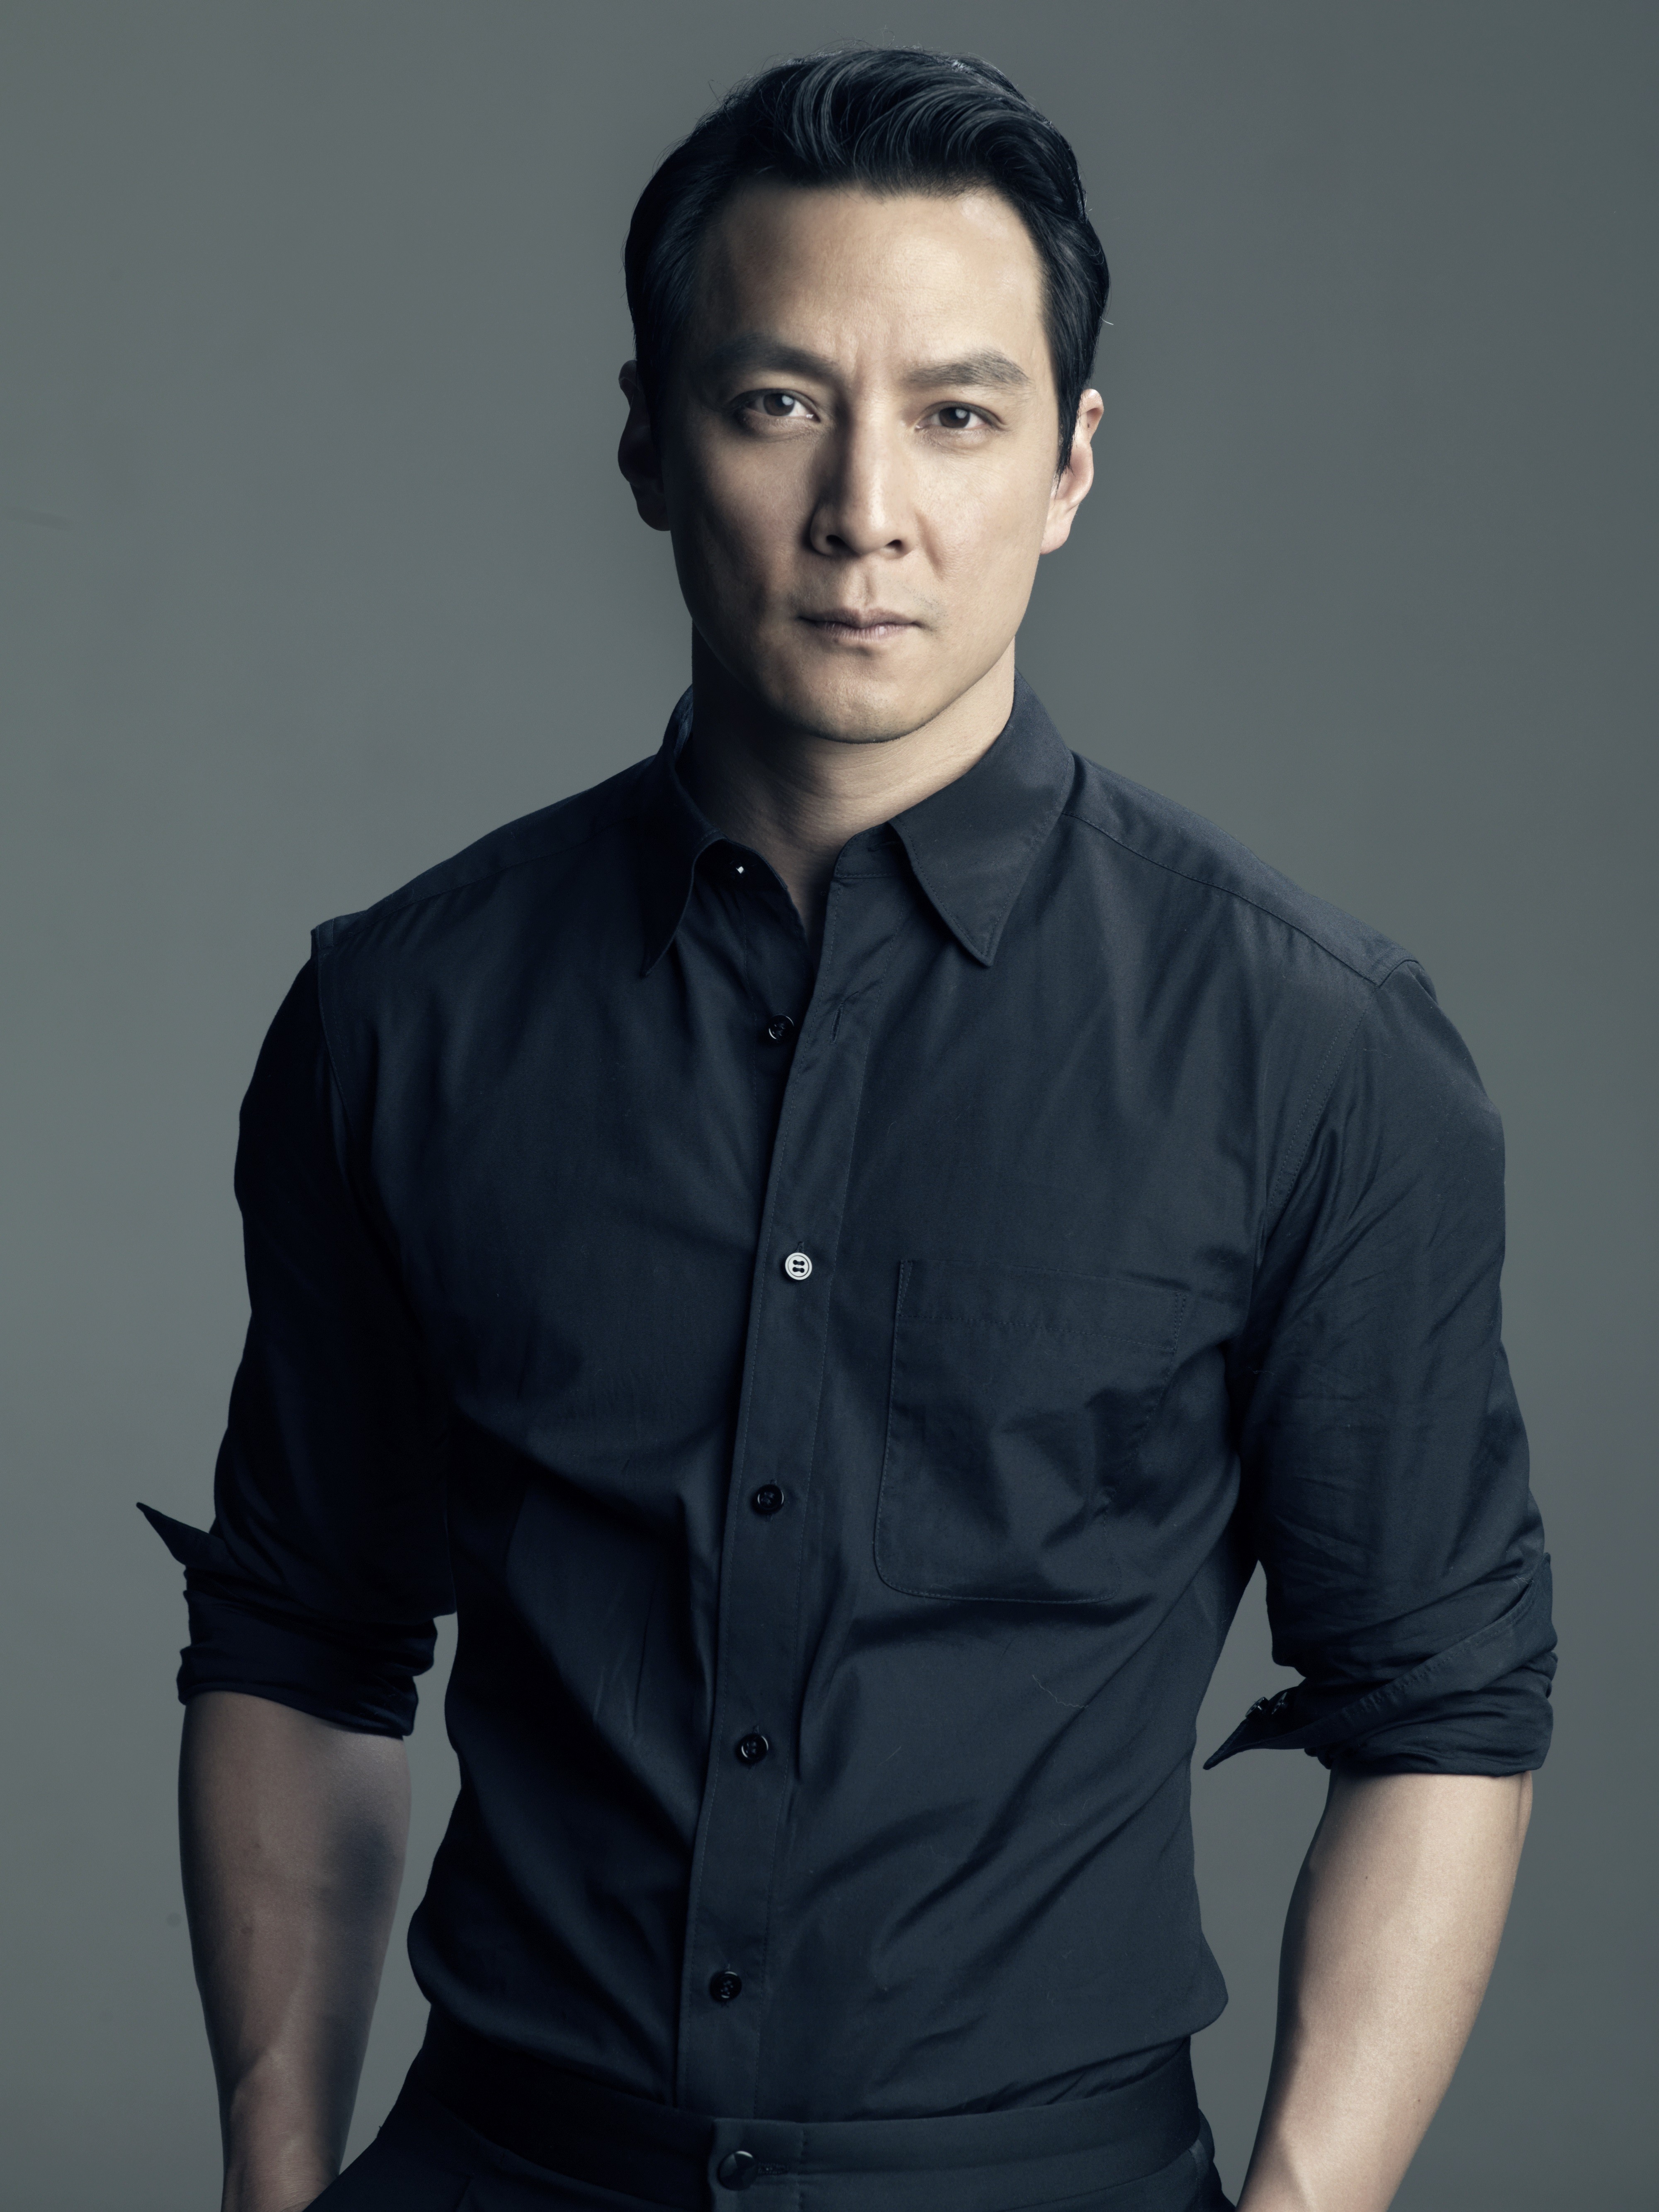 Daniel Wu is making inroads into the Hollywood acting scene.